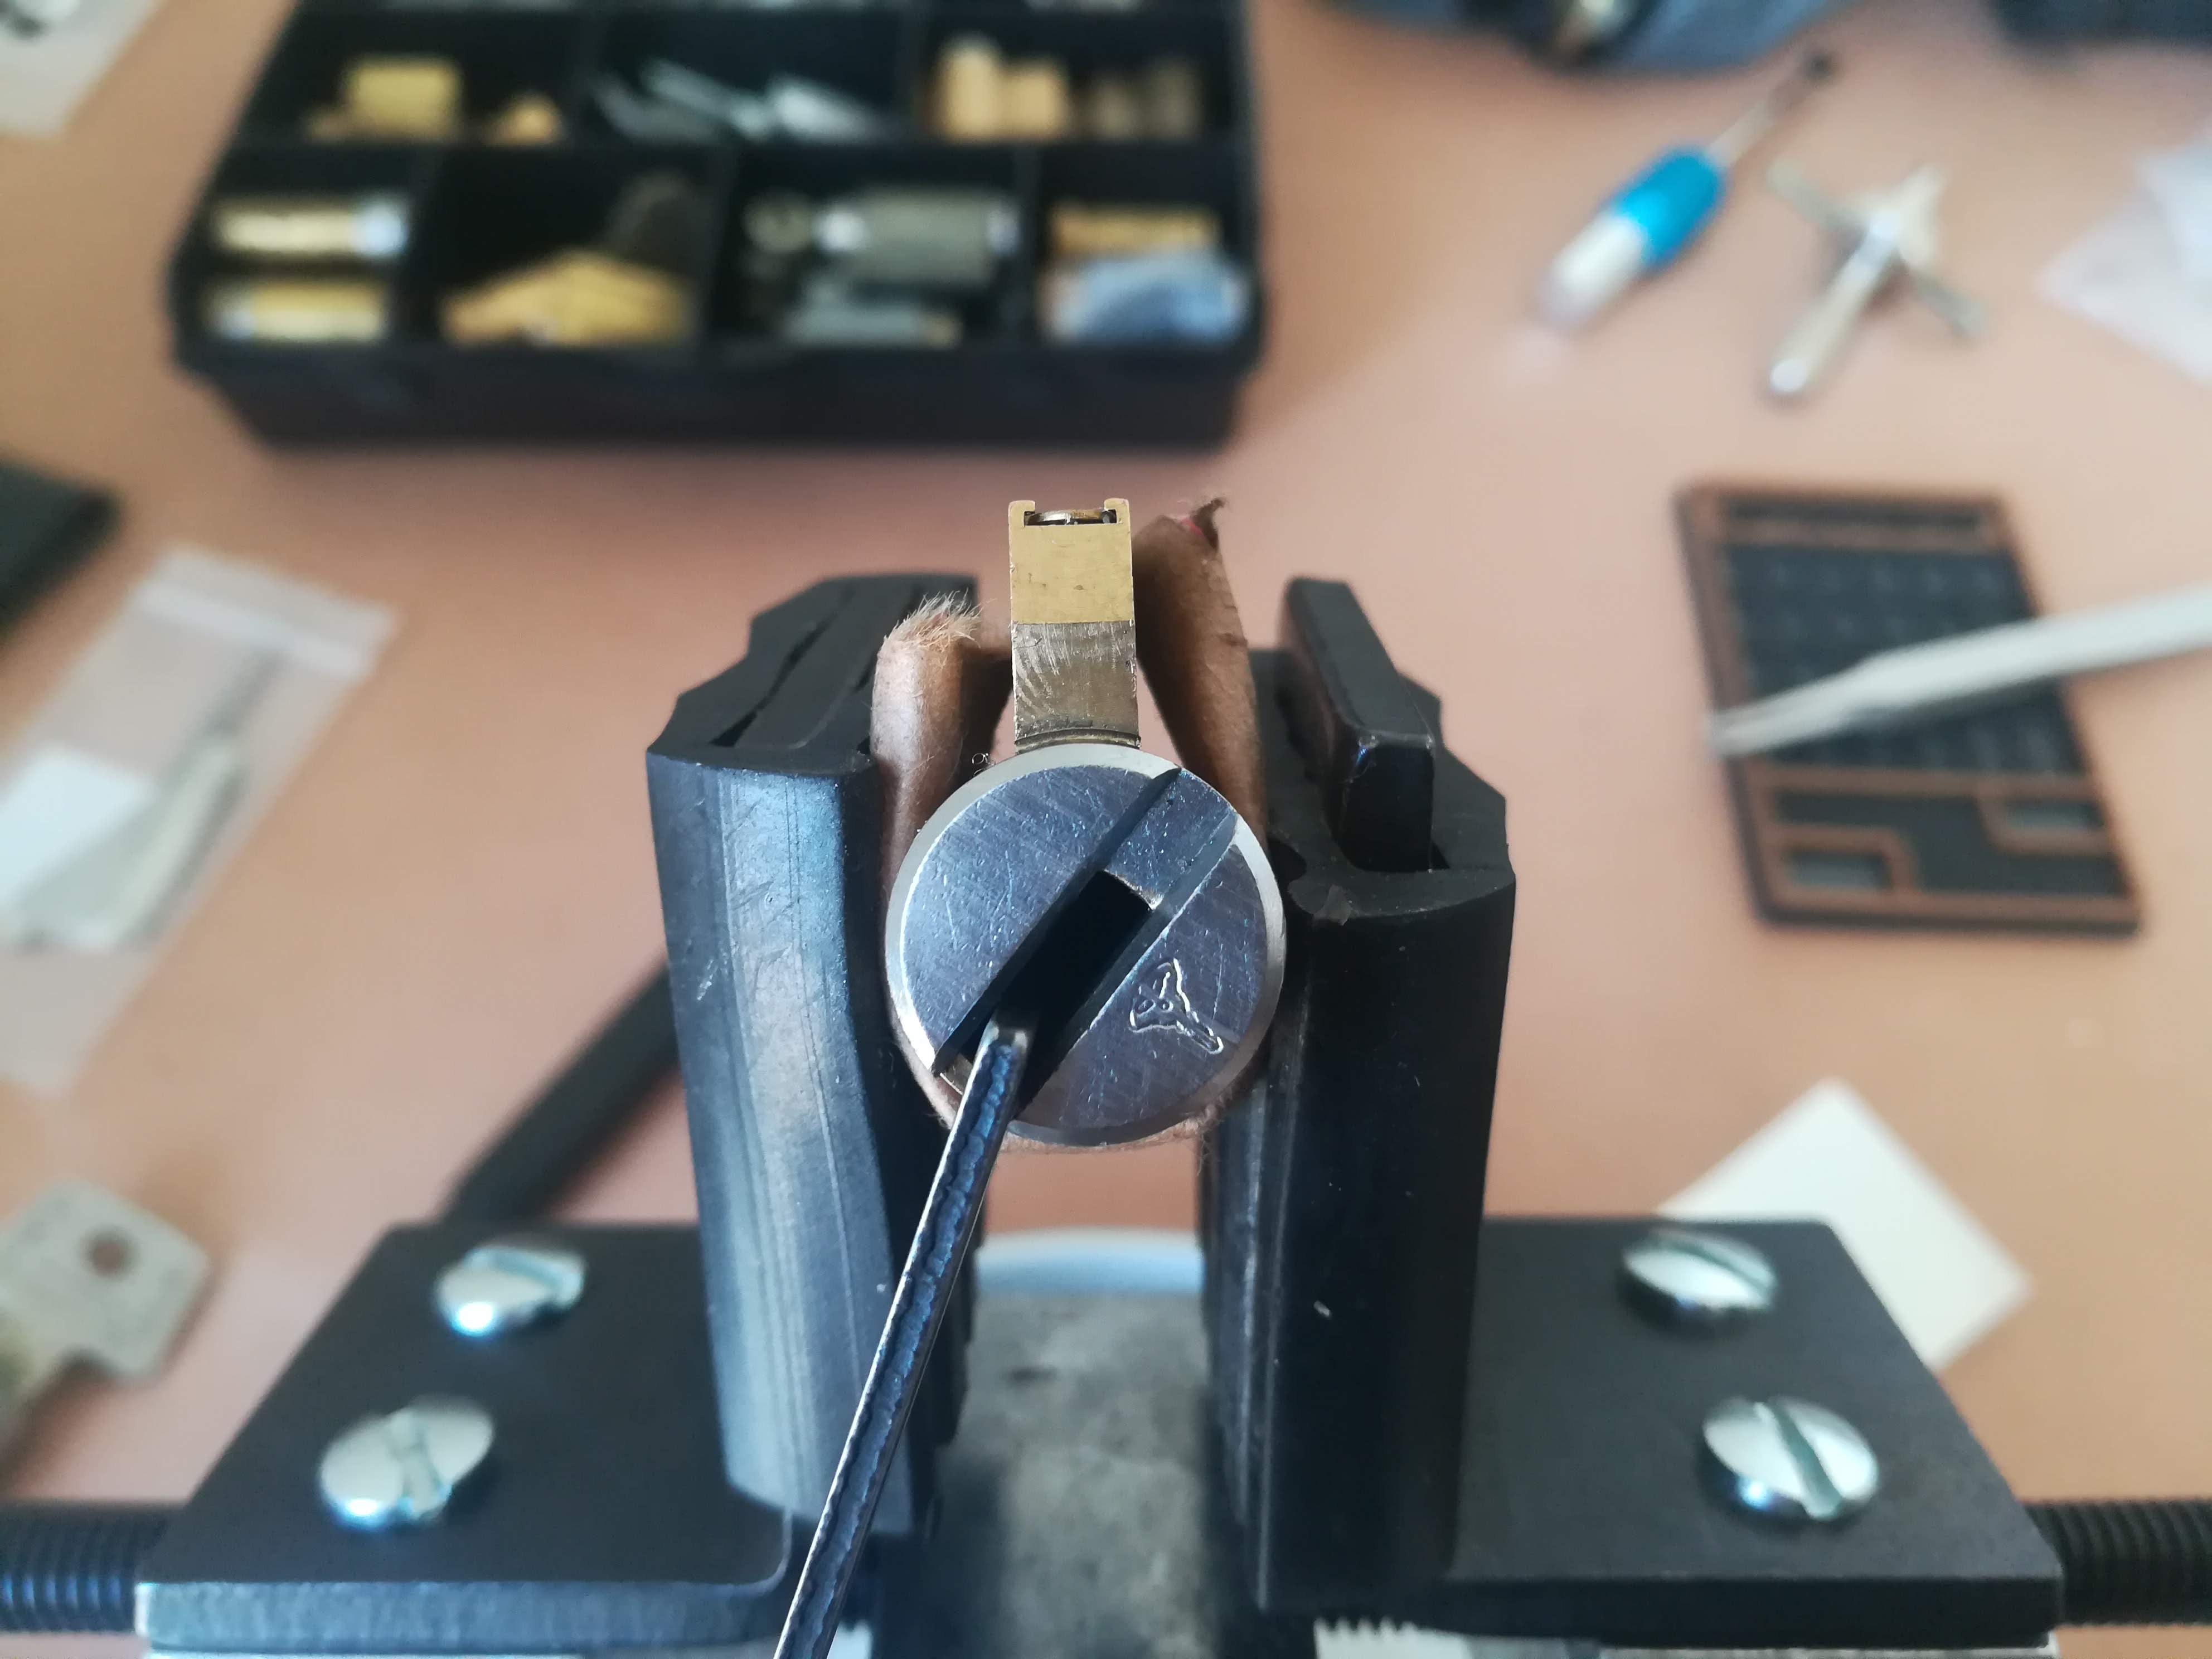 Photo of a Mul-T-Lock Interactive in a vise with a tension wrench hanging out of the keyway. The keyway has been rotated, showing that it has been picked.